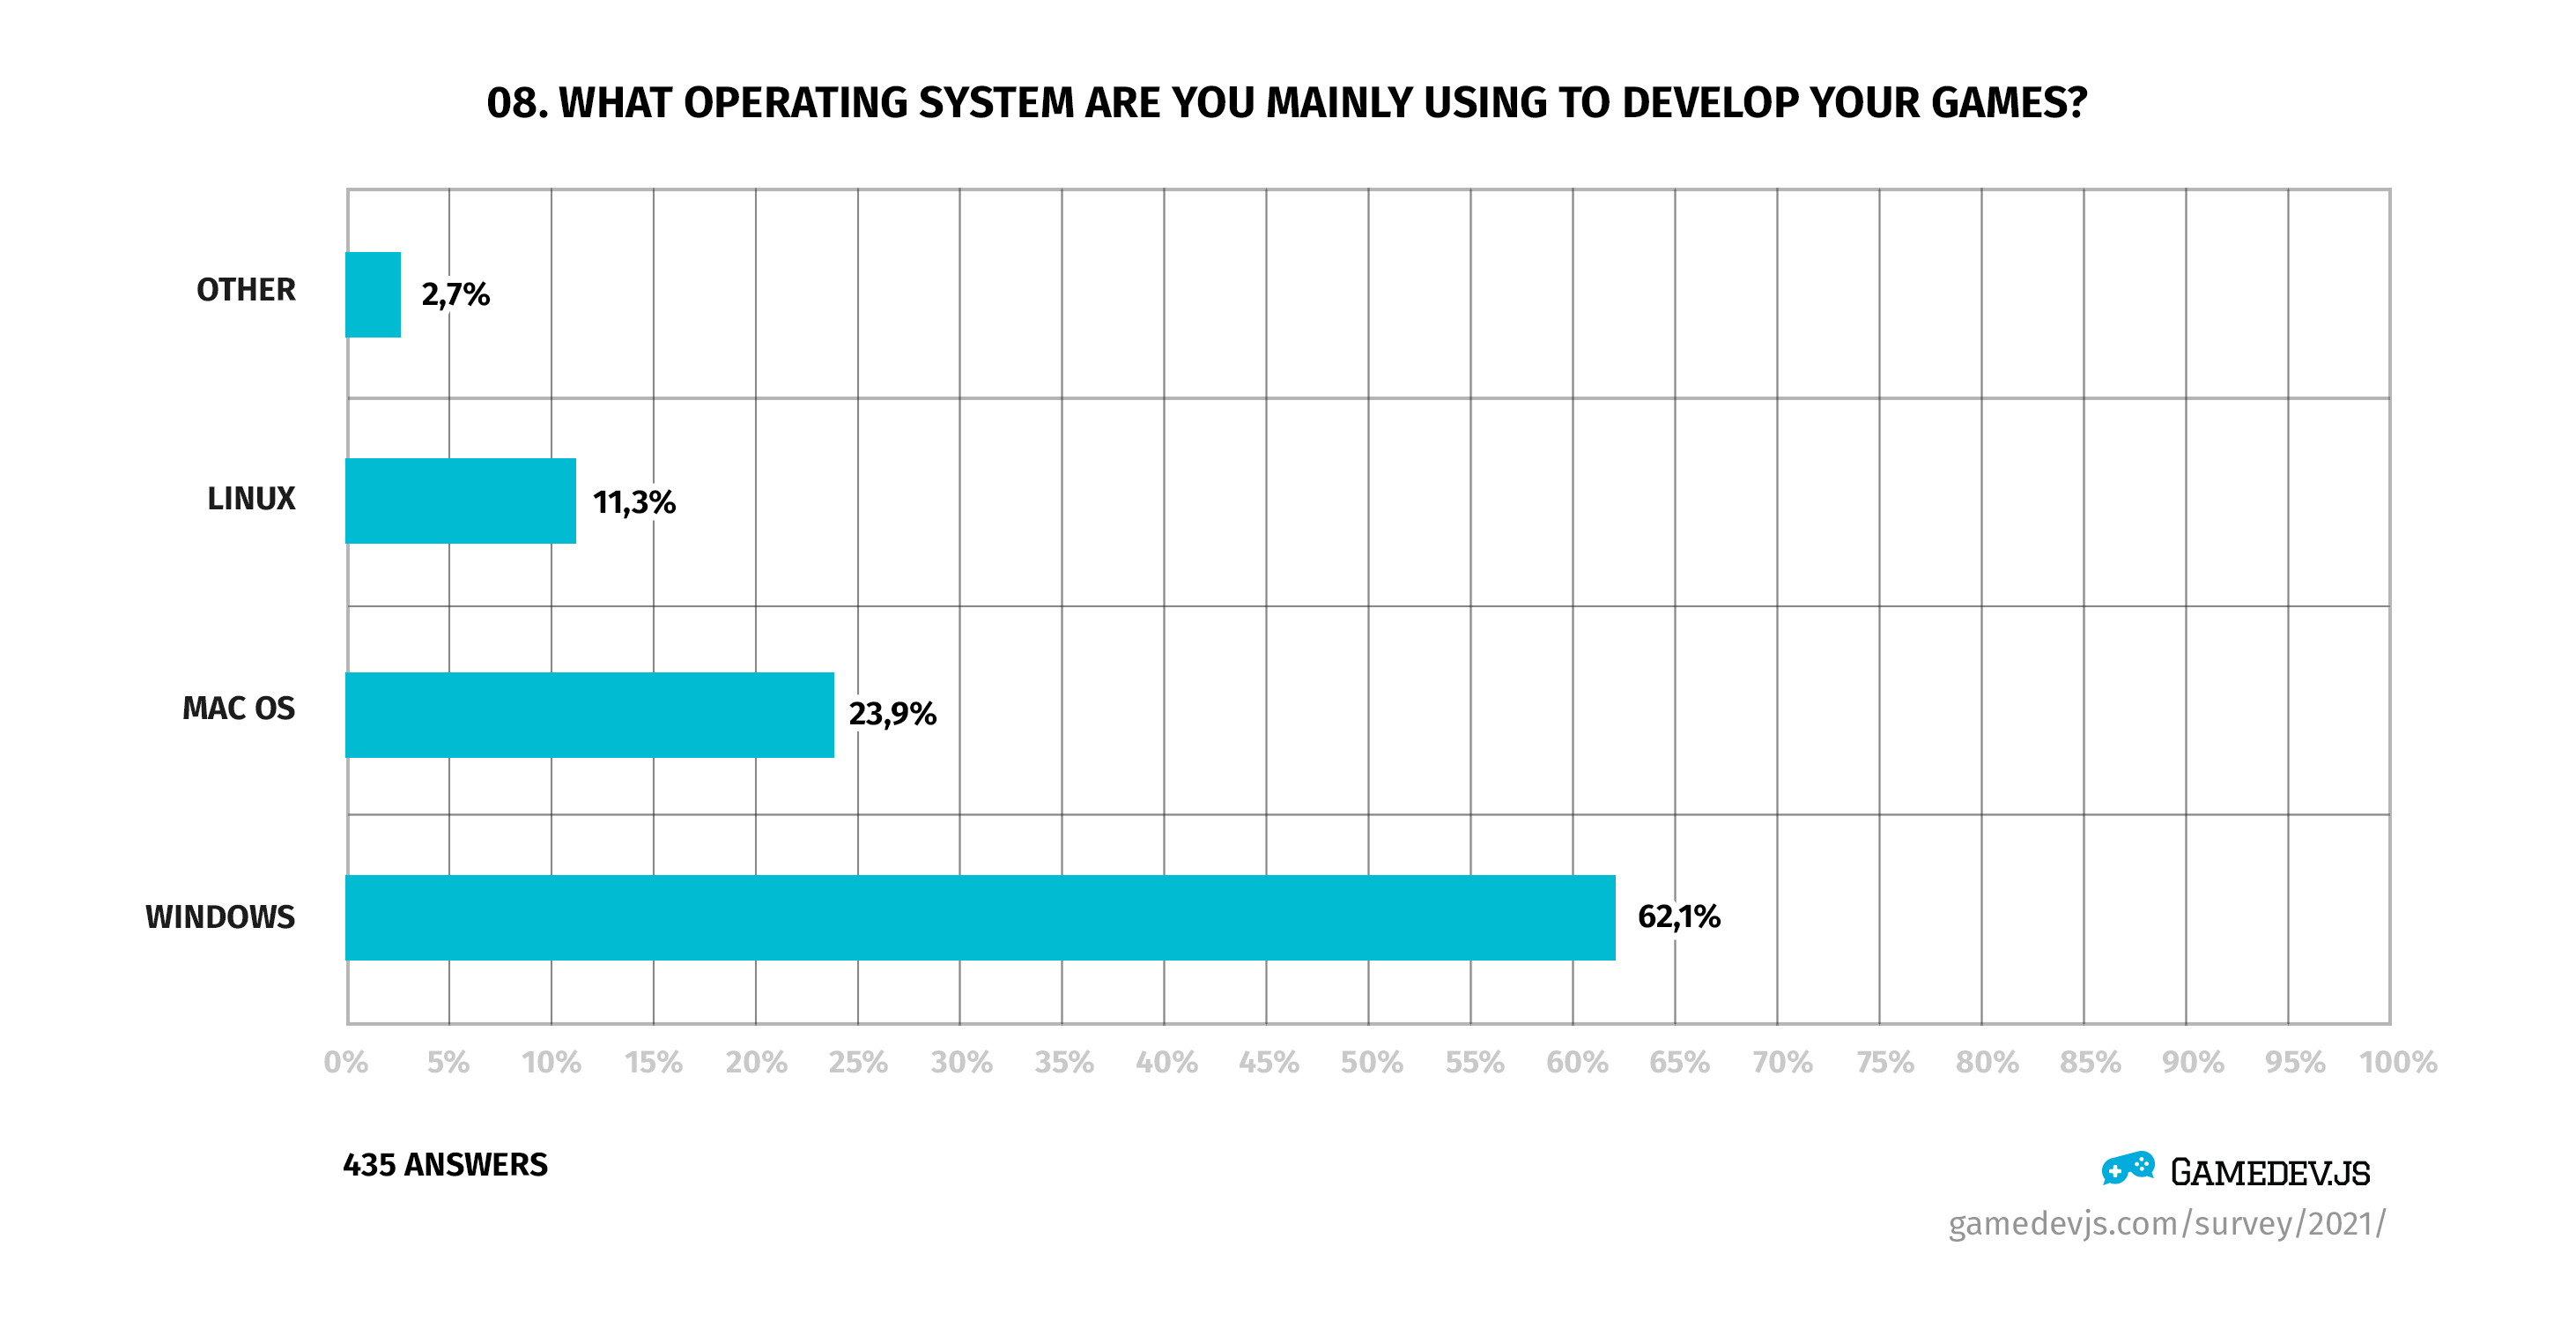 Gamedev.js Survey 2021 - Question #8: What operating system are you mainly using to develop your games?